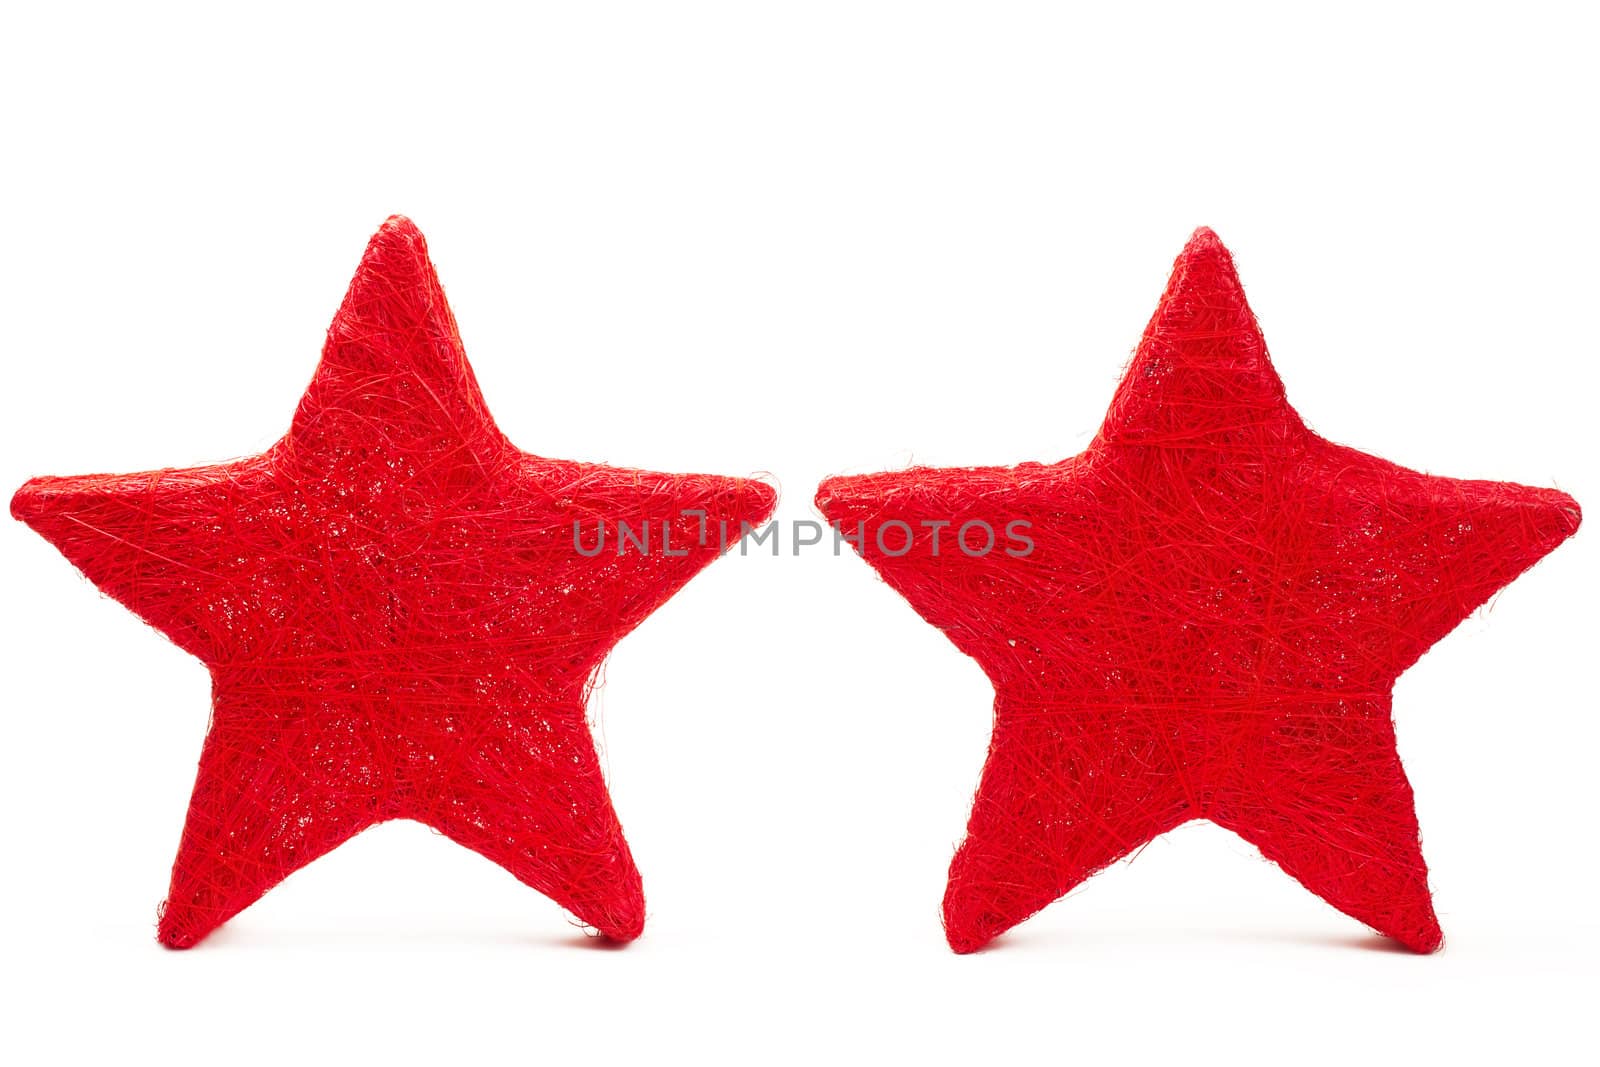 two red thread stars standing on white background